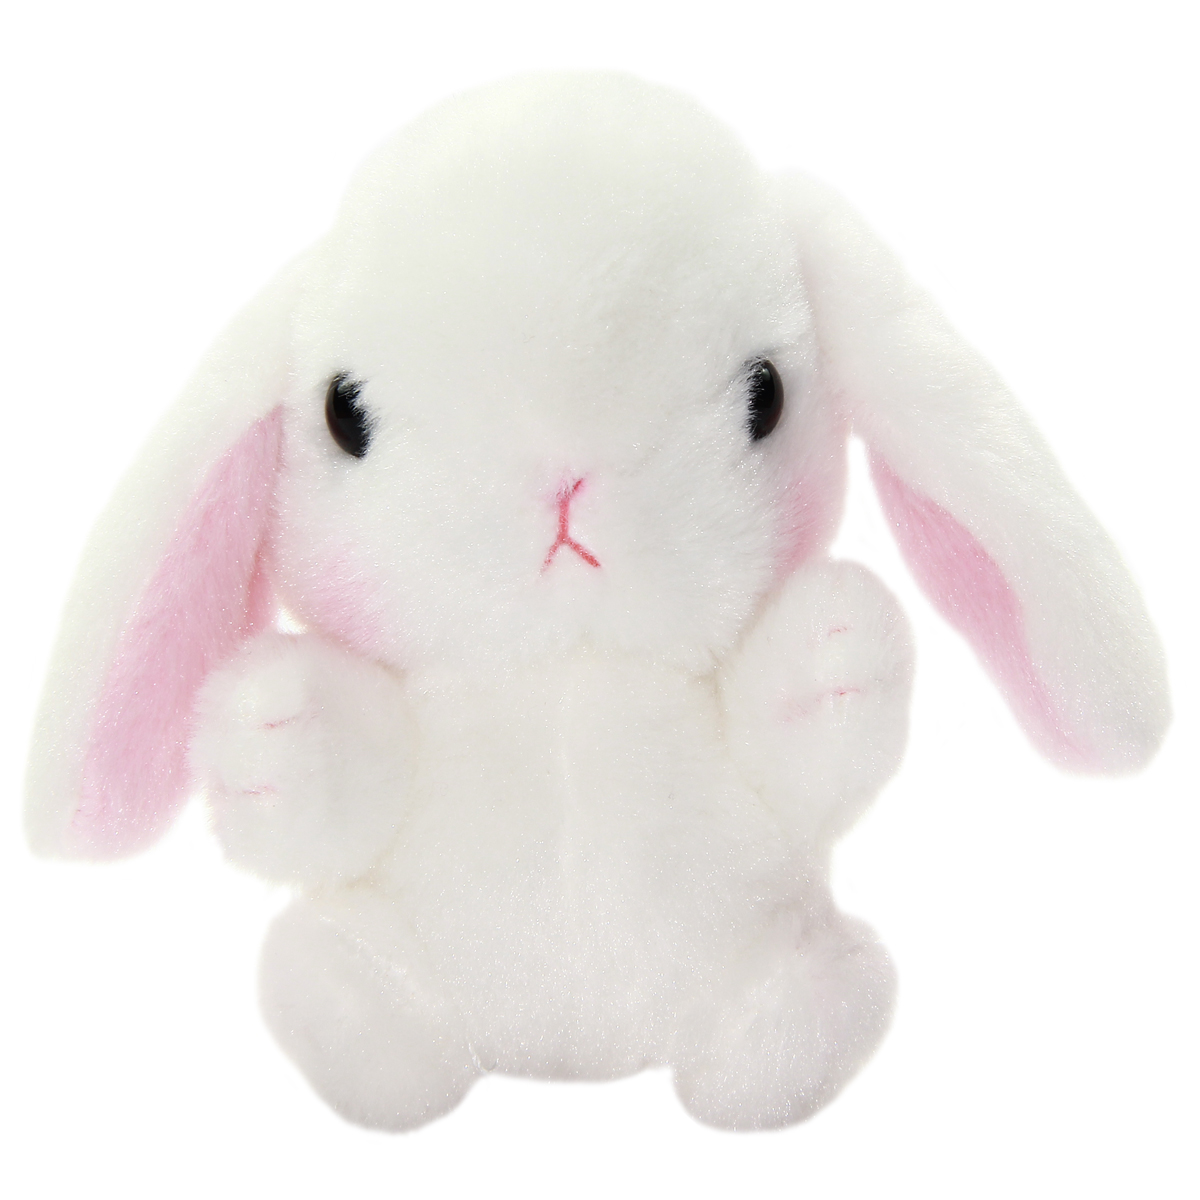 Amuse Gathering Bunny Plushie Collection Cute Stuffed Animal Toy White 4 Inches